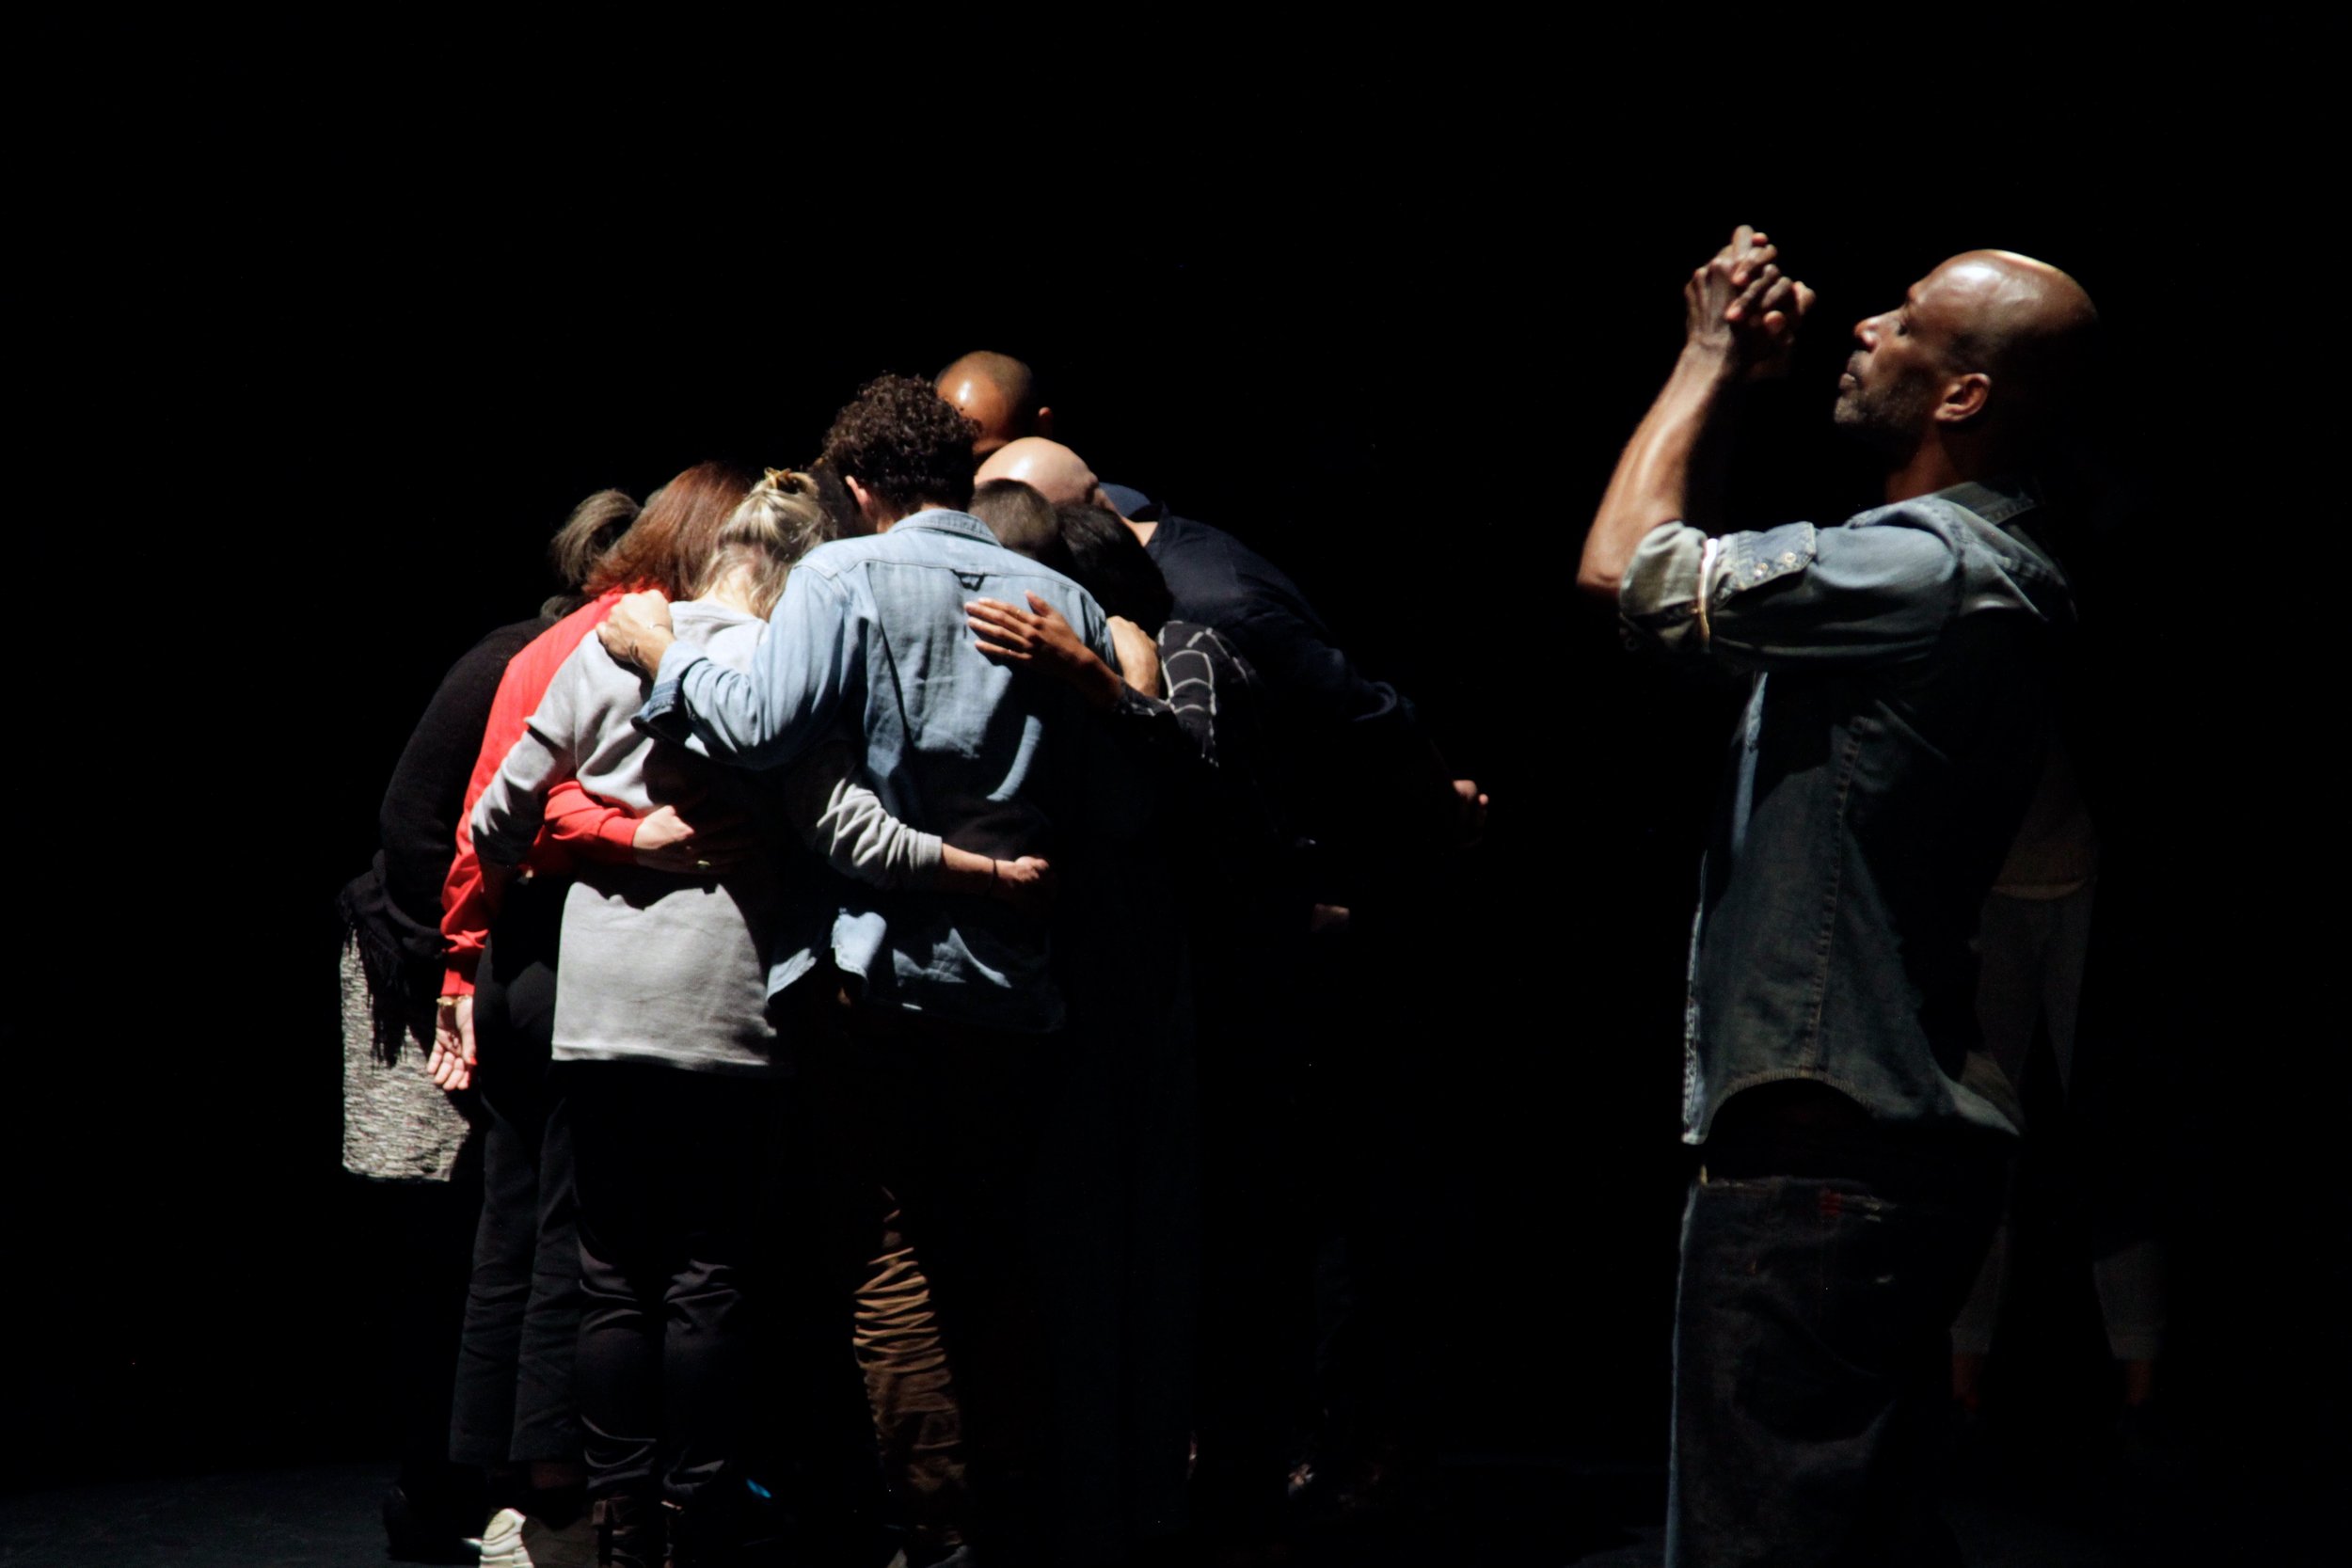 A performer stands with hands clasped in front of his face near a group huddled with arms around each other. Photo by Simon Courchel.